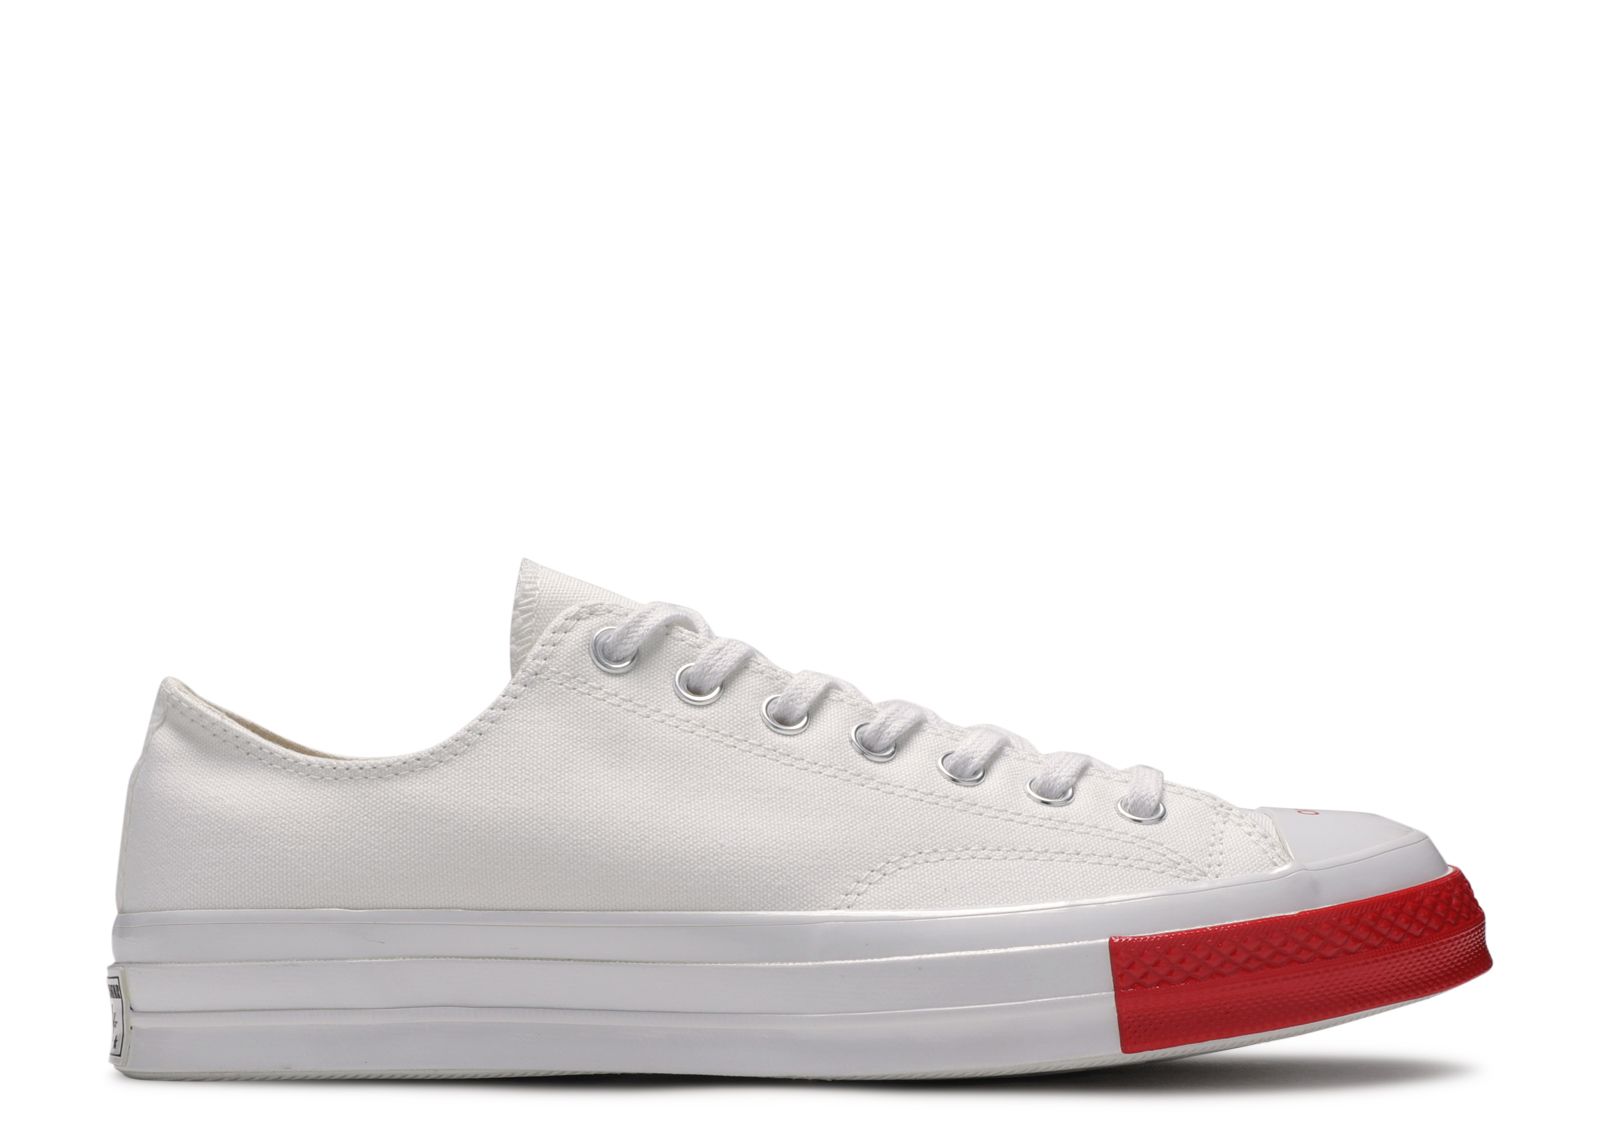 Кроссовки Converse Undercover X Chuck 70 Low 'Order And Disorder', белый